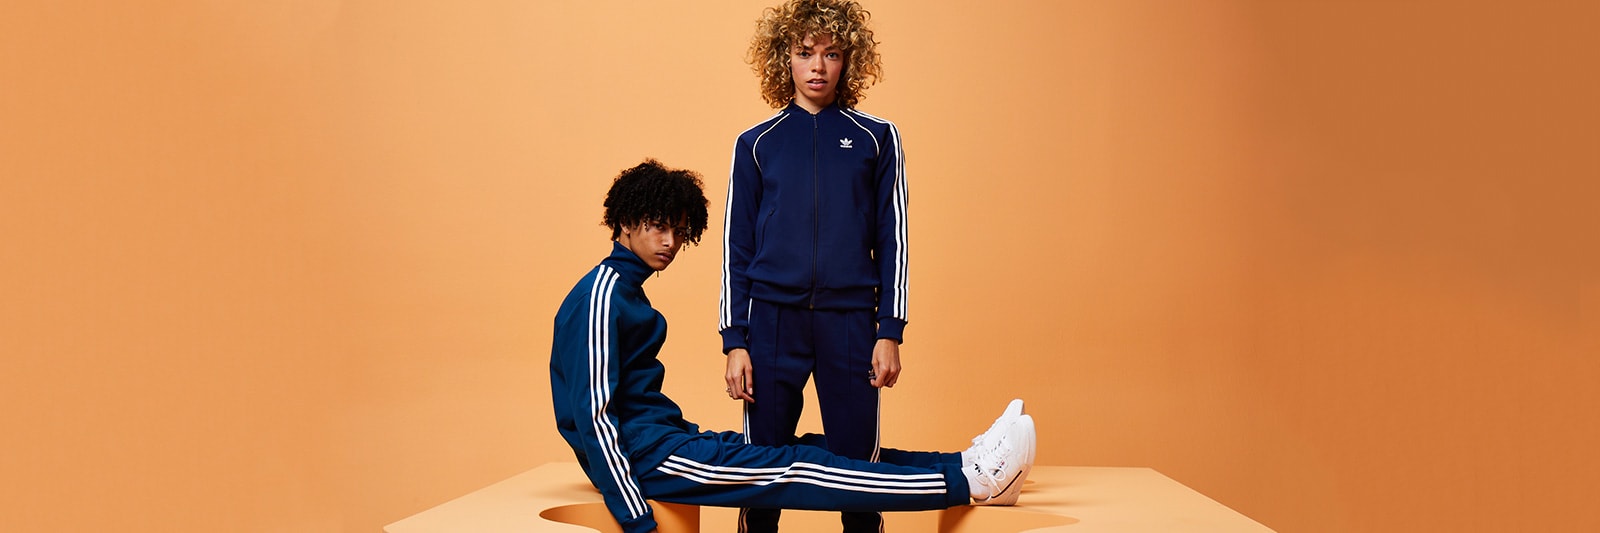 matching adidas sweat suits for couples